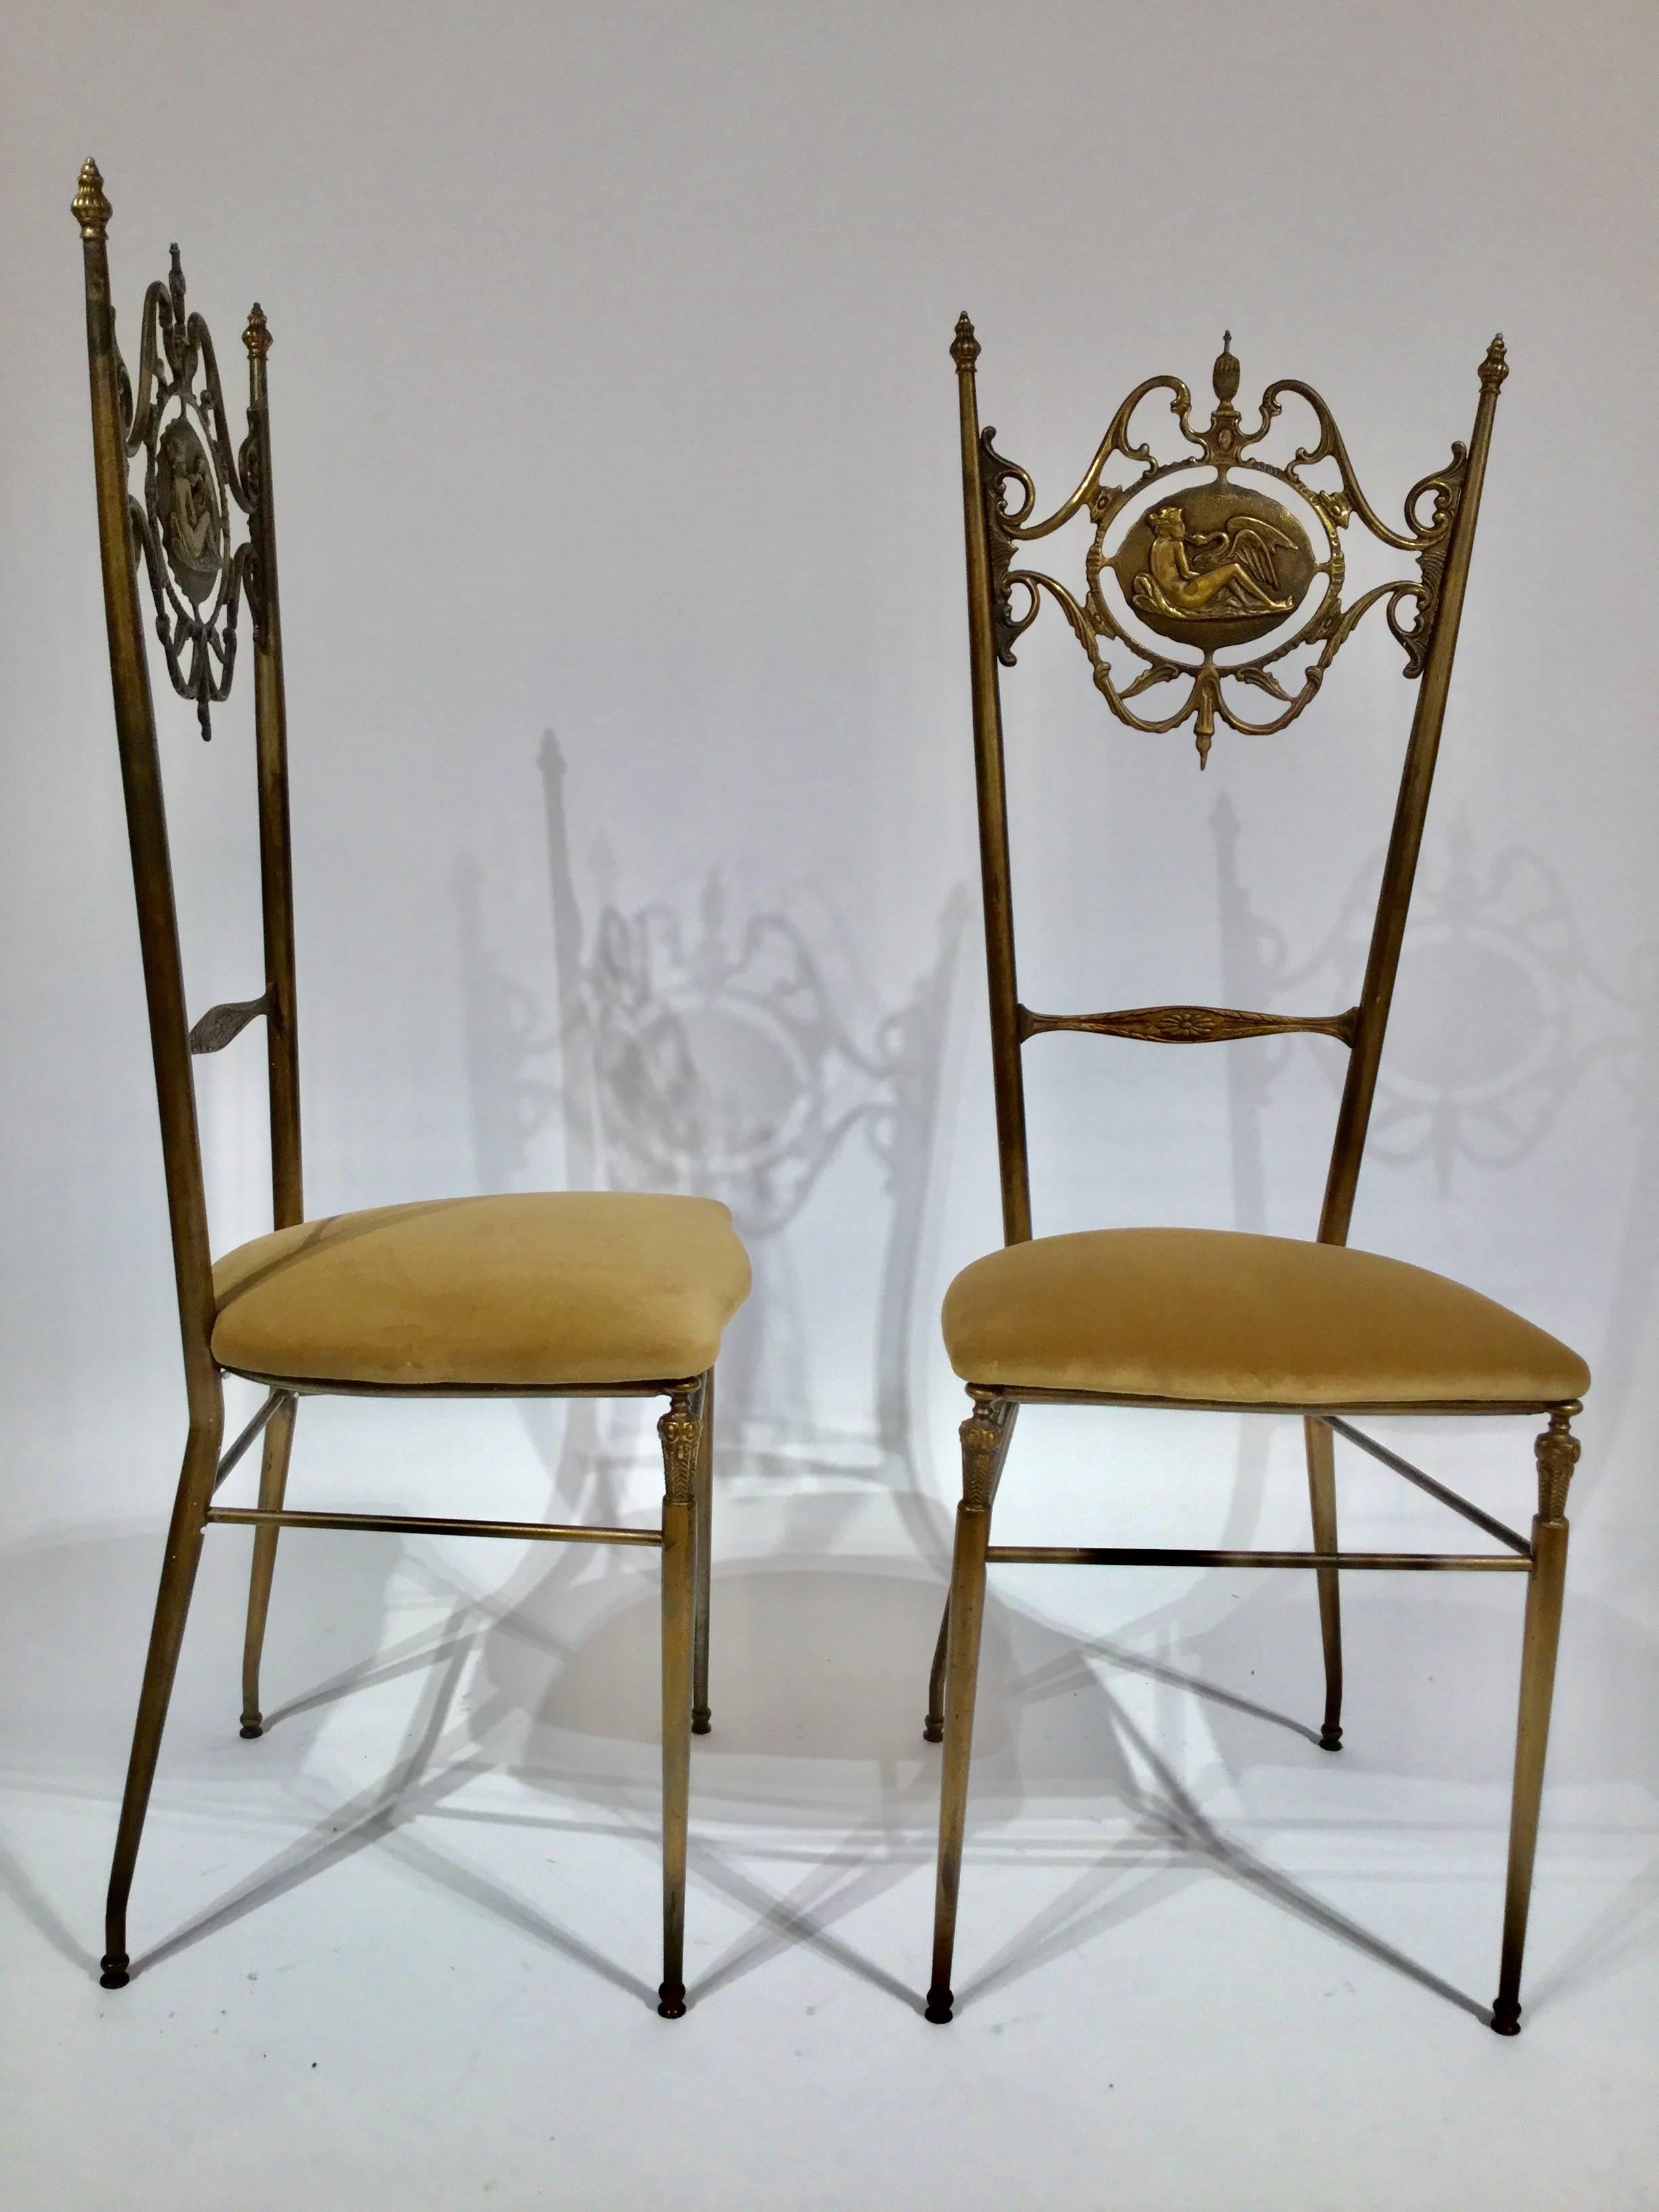 A pair of Italian designed Chiavari neoclassical chairs. Brass velvet seat on the chair back a centre median depicting the Greek mythology Leda and the Swan, circa 1950.
Would work well as side chairs, great in a dressing powder room or fantastic